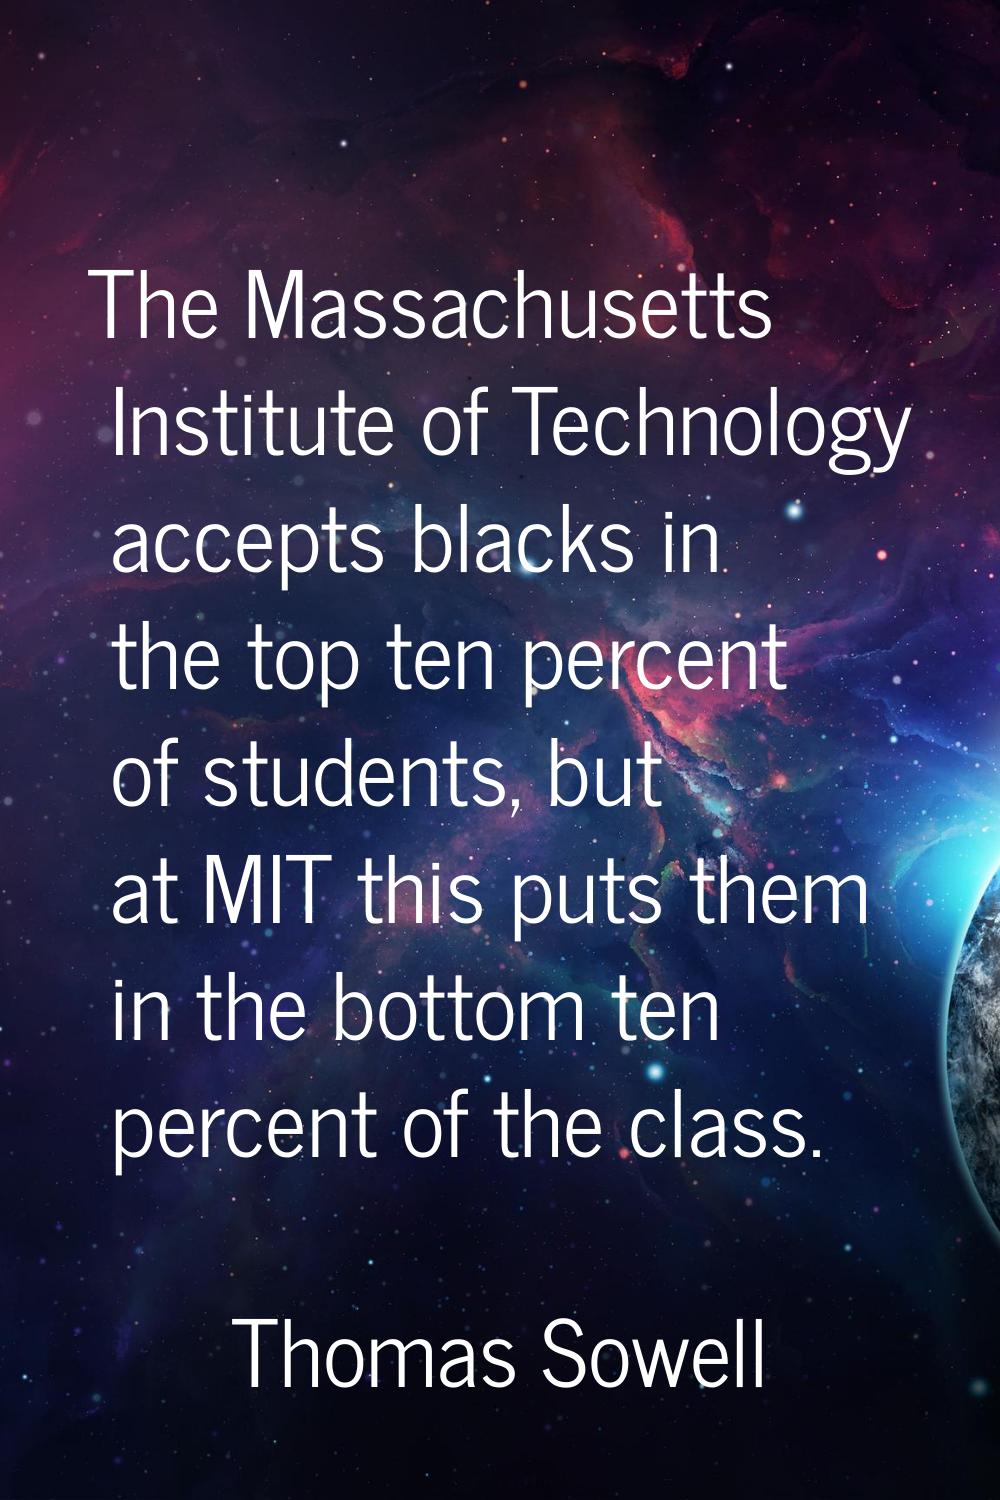 The Massachusetts Institute of Technology accepts blacks in the top ten percent of students, but at